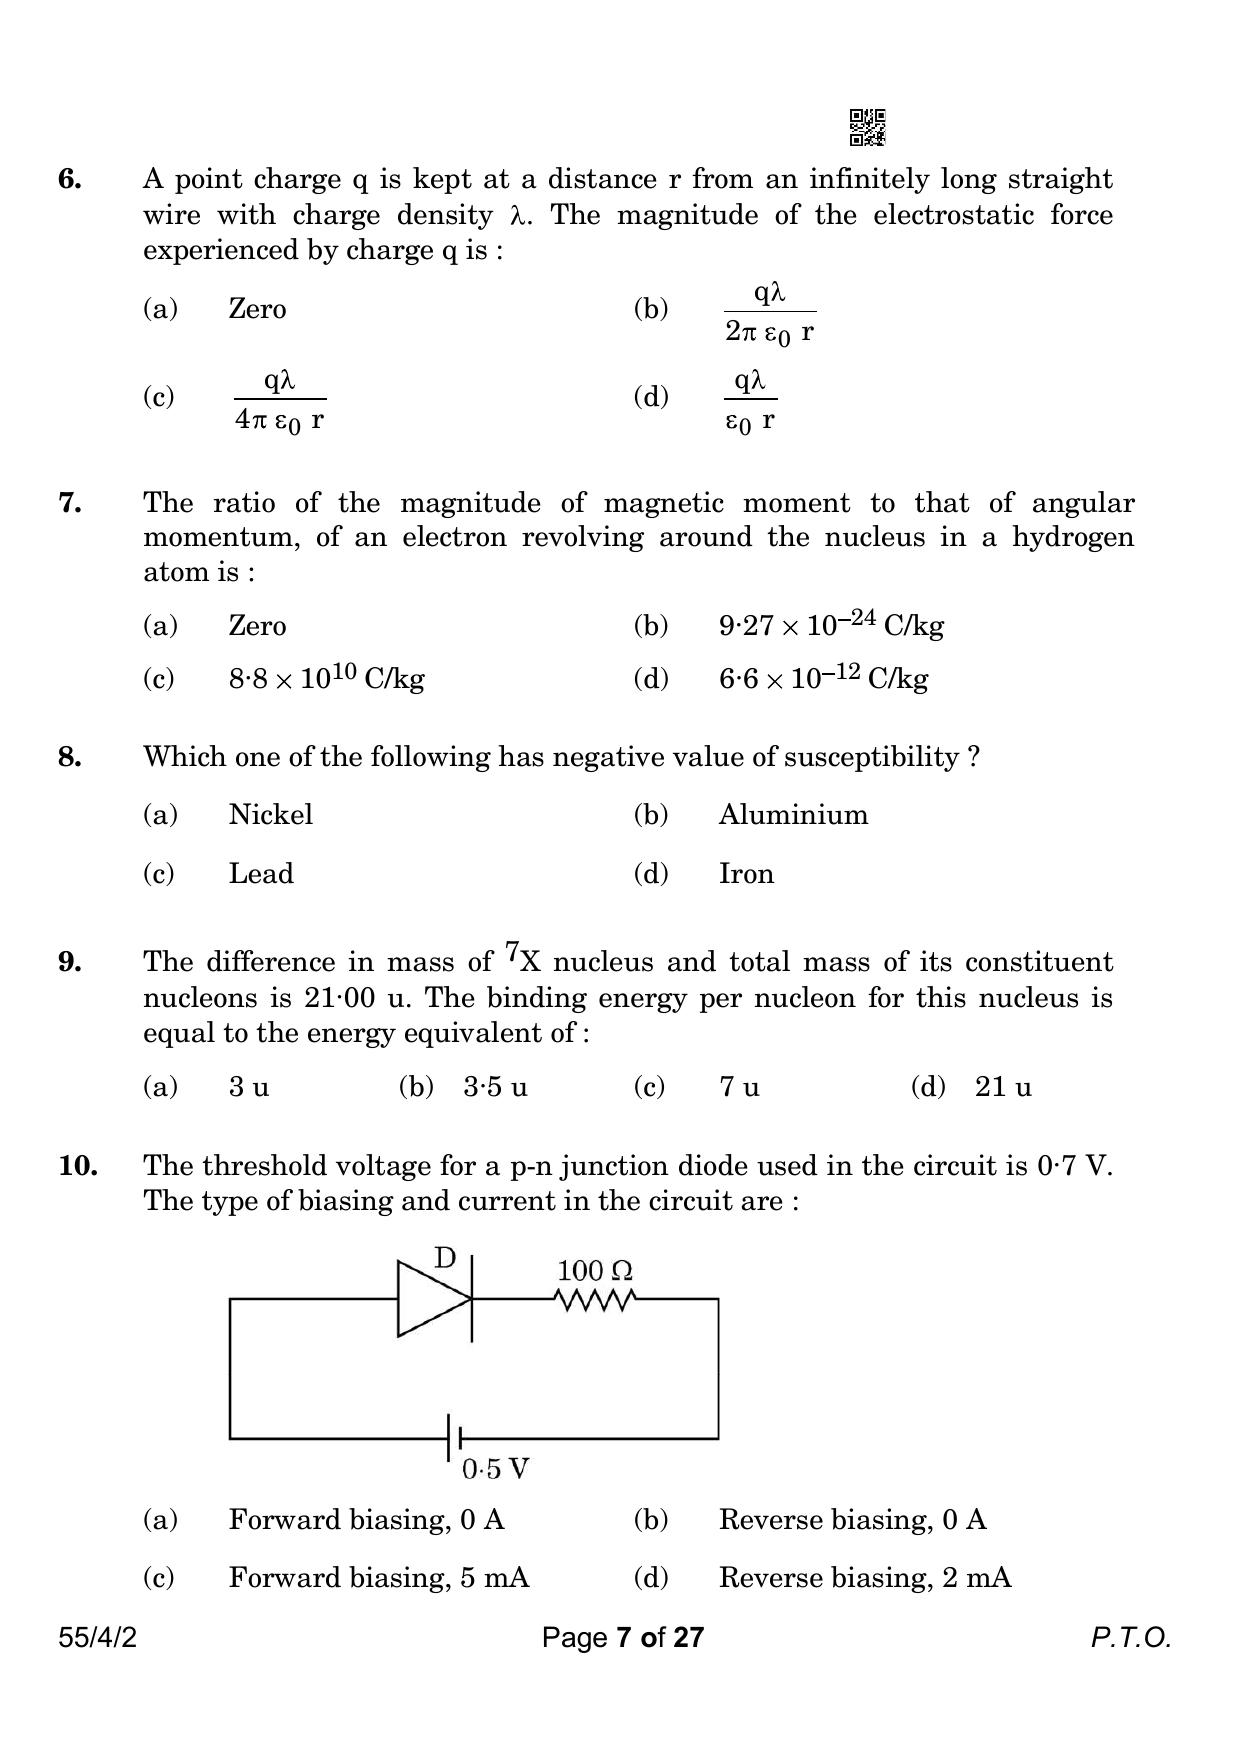 CBSE Class 12 55-4-2 Physics 2023 Question Paper - Page 7